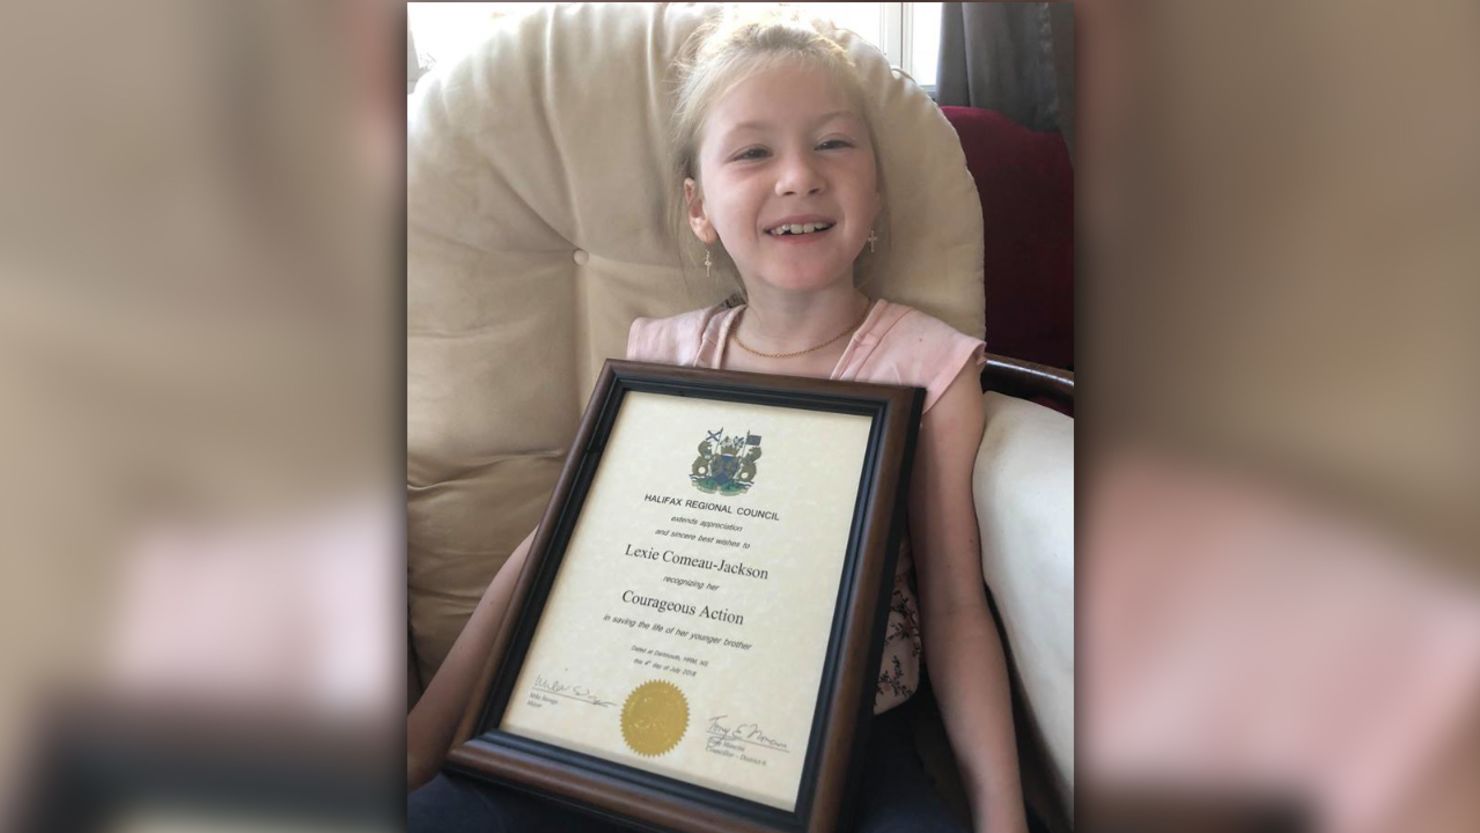 The city's  Regional Council recognized Lexie as a hero on Wednesday.